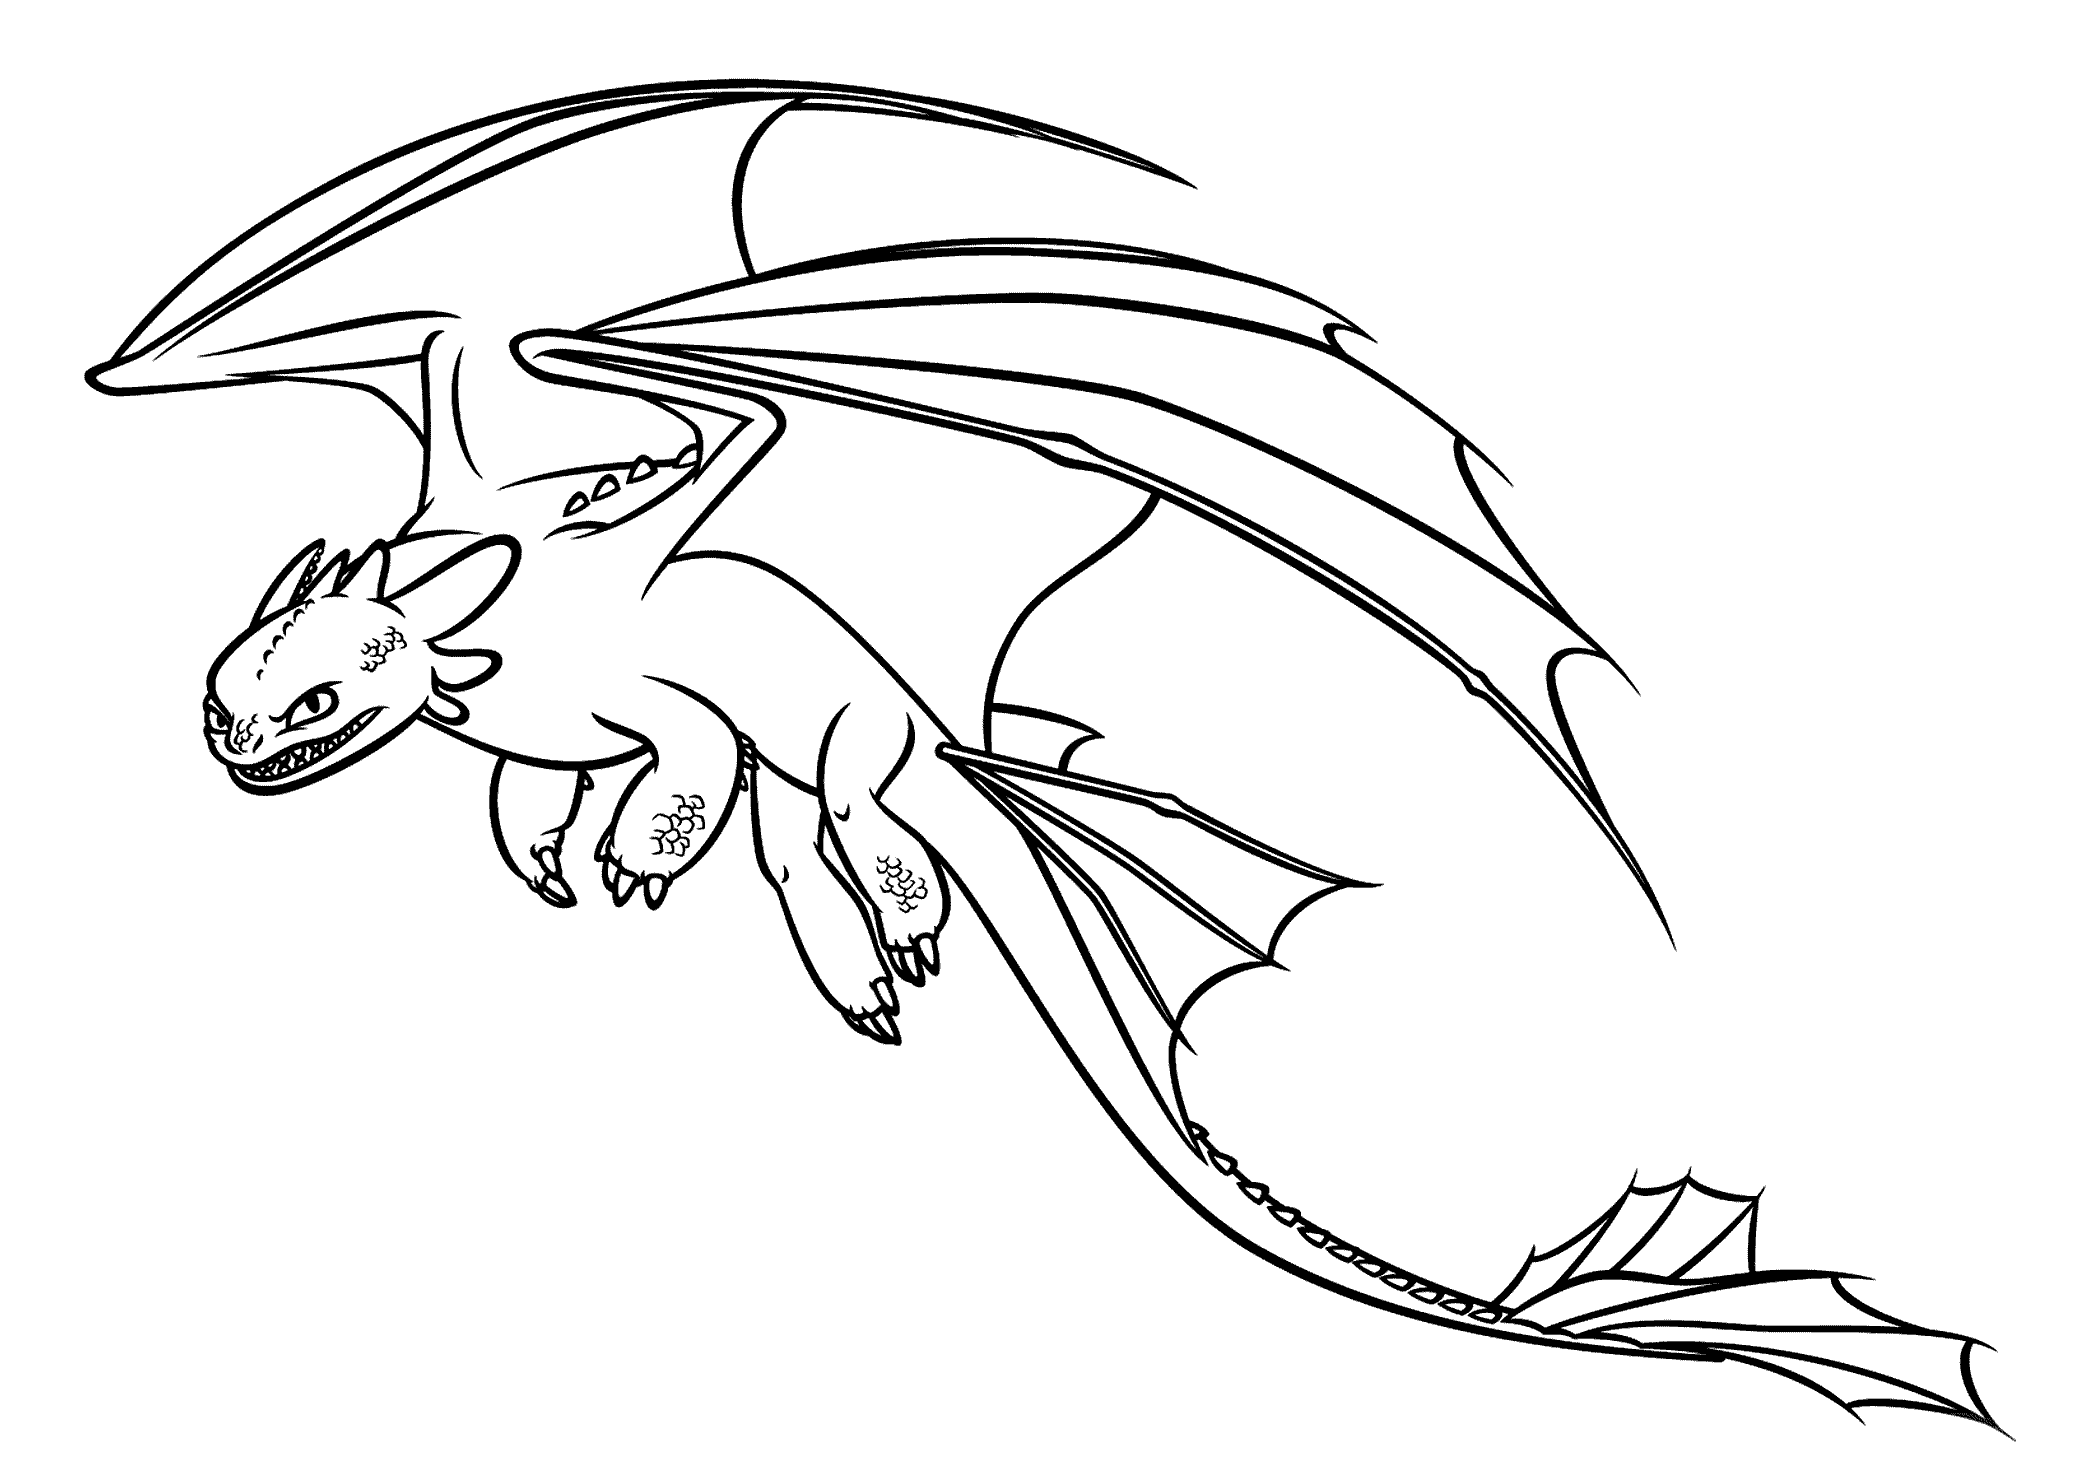 coloring how to train your dragon how to train dragon coloring pages for kids printable free coloring train your dragon how to 